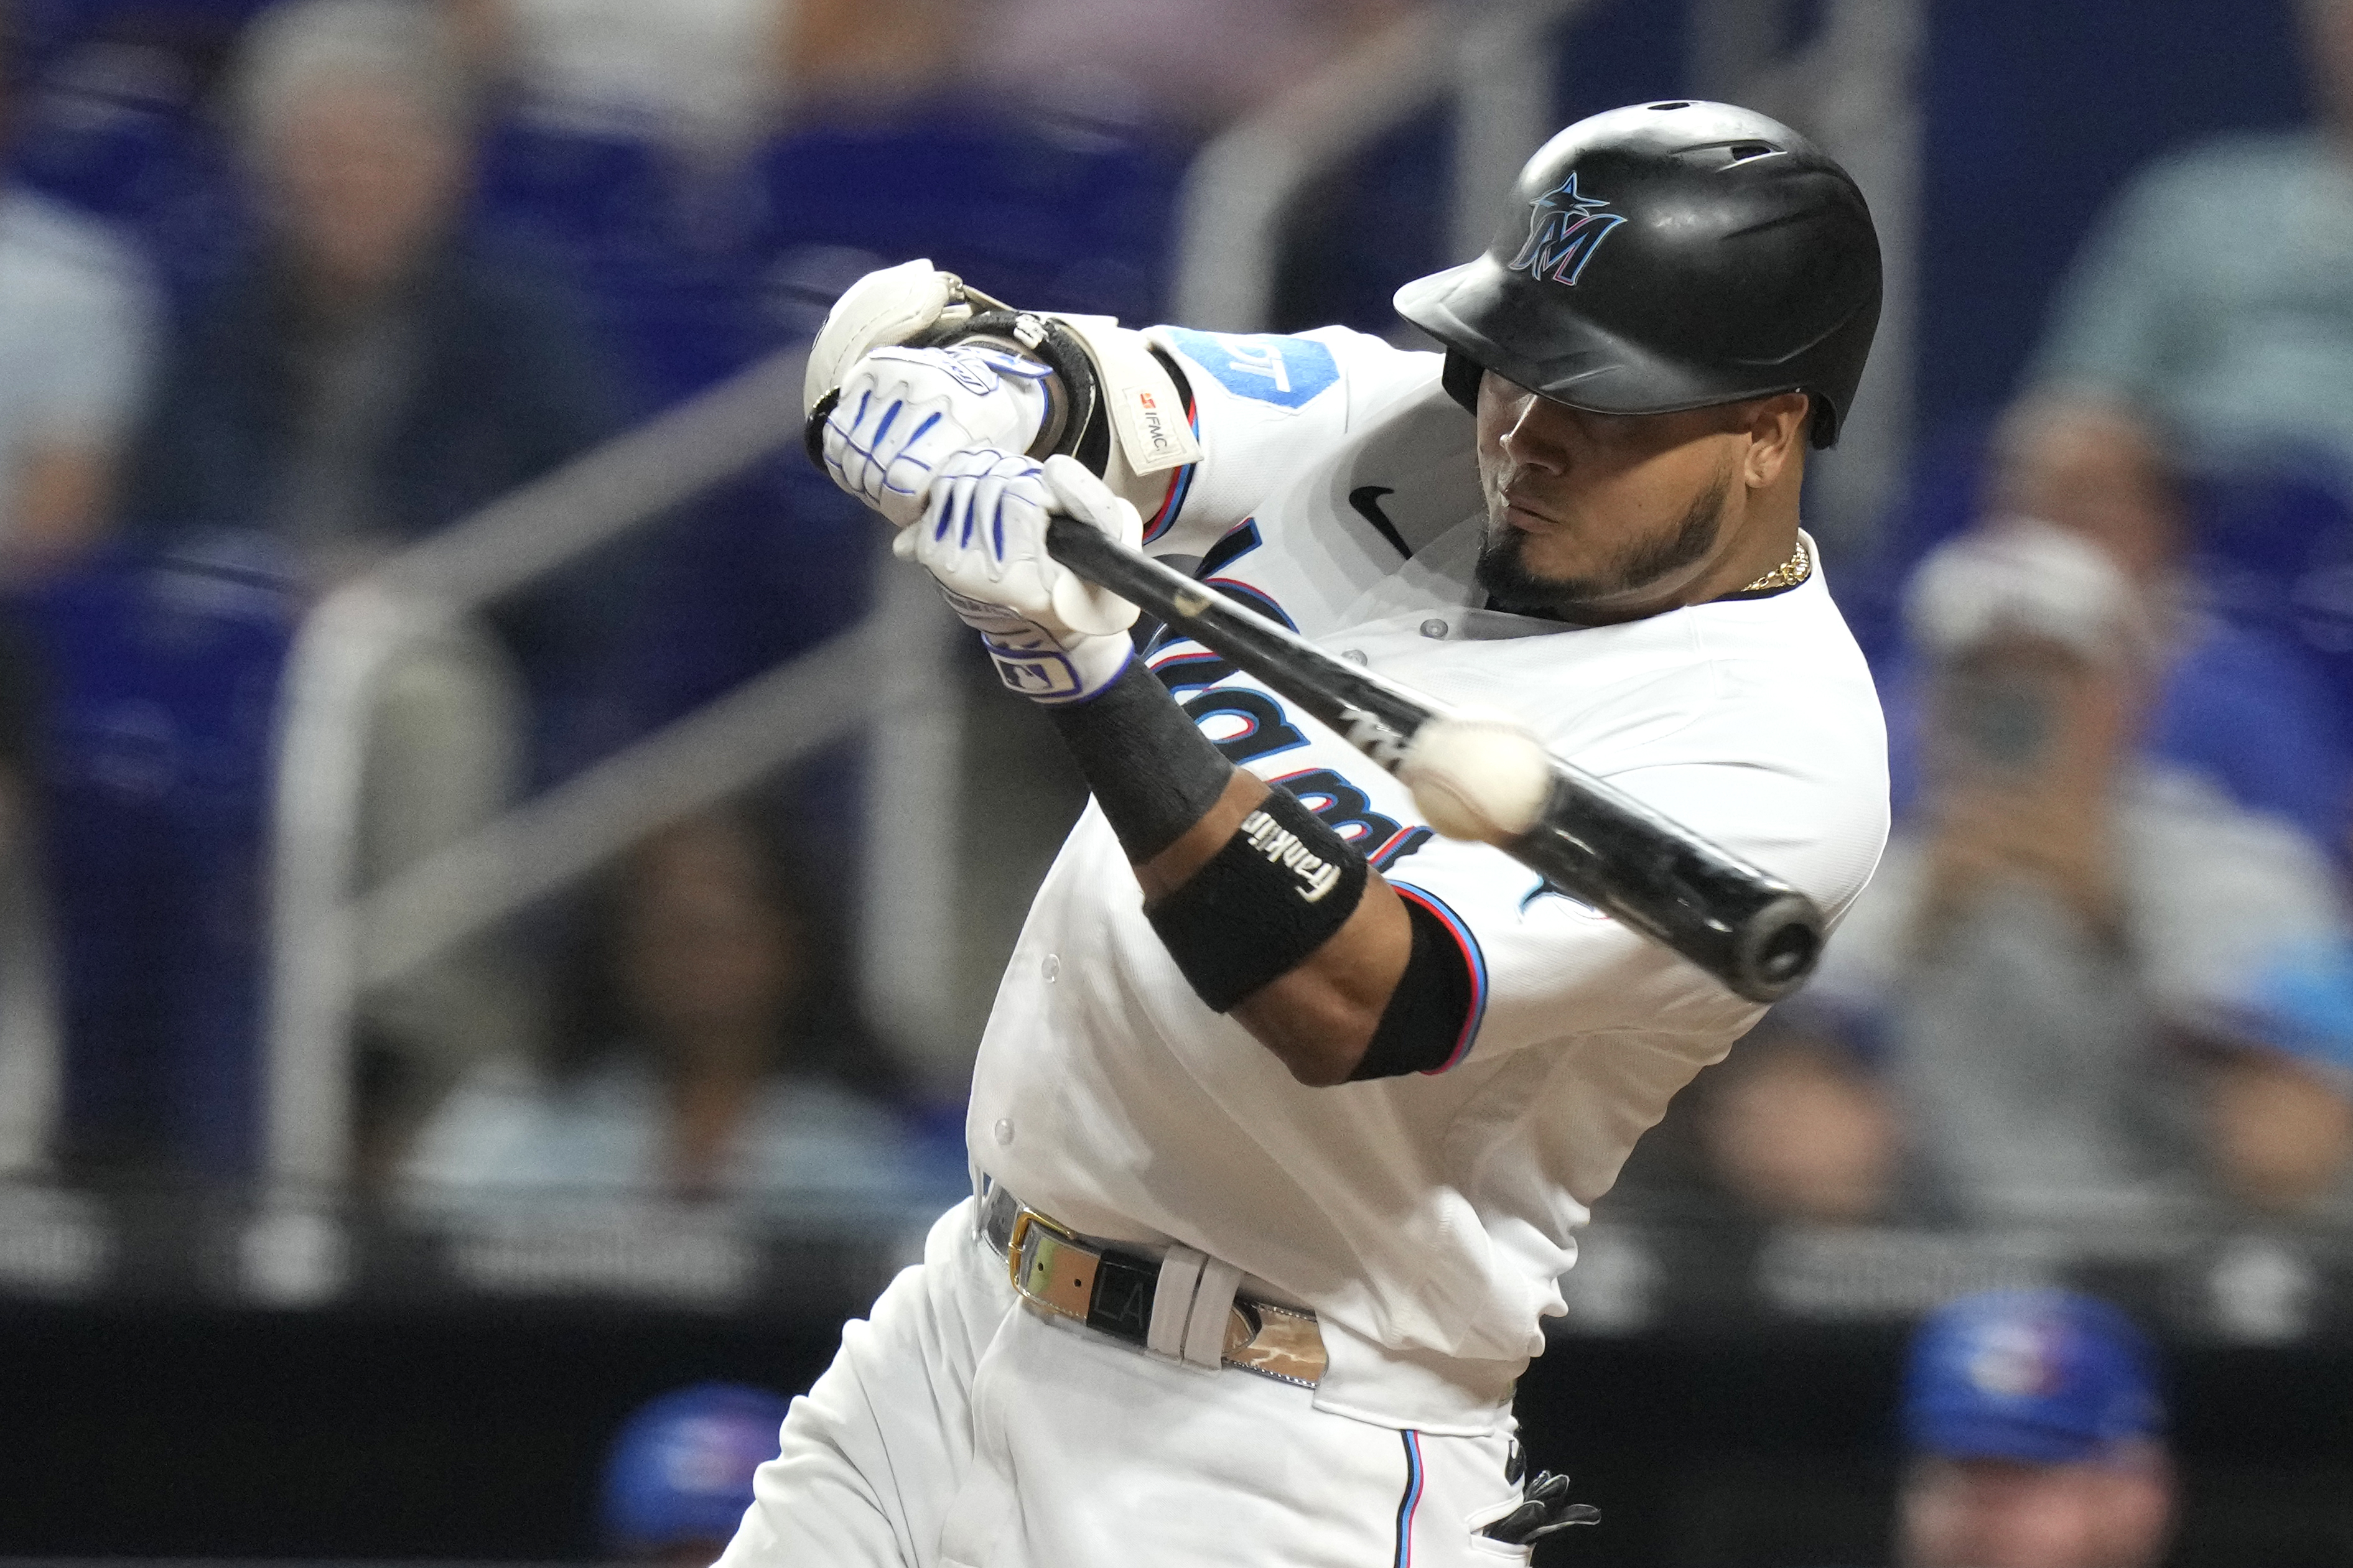 Luis Arraez becomes first ever Miami Marlins player to hit 'the cycle